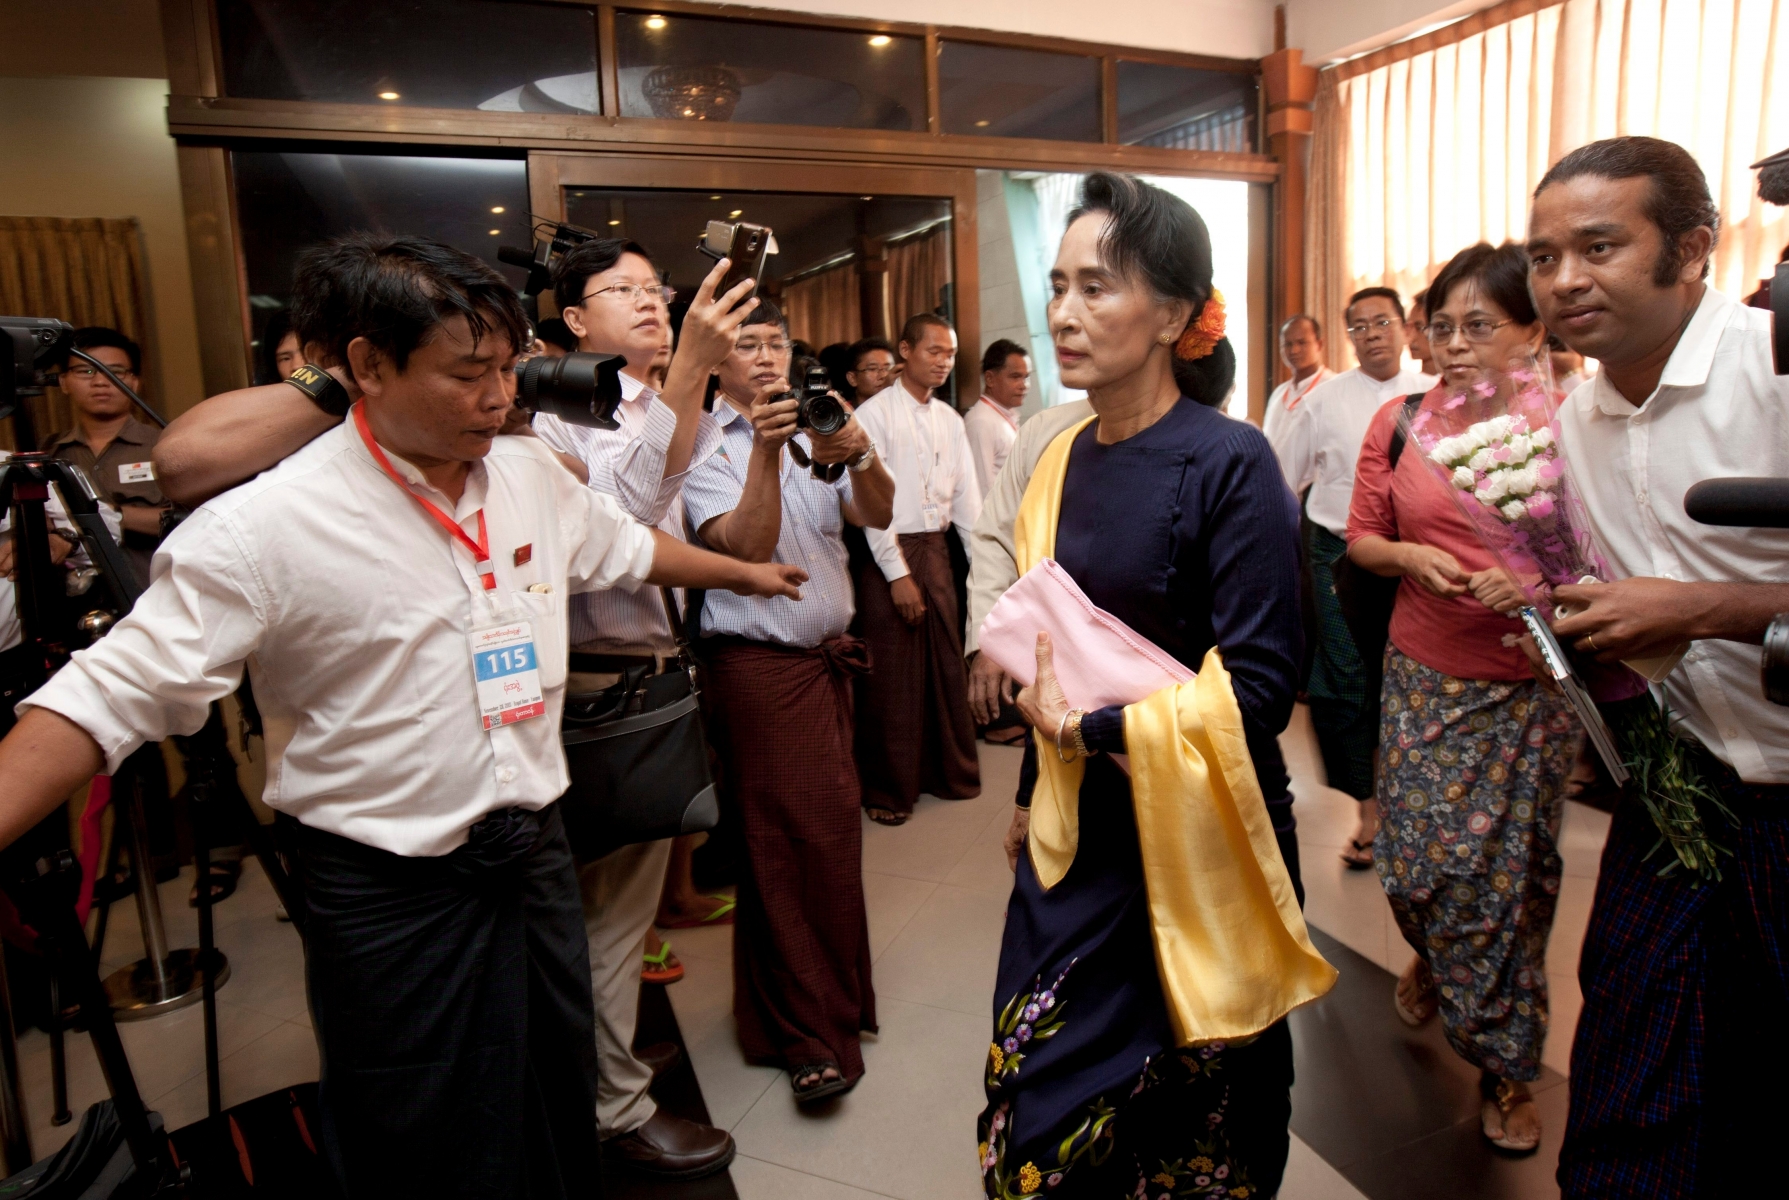 Myanmar opposition leader Aung San Suu Kyi, center, arrives to attend a meeting with newly-elected lawmakers of her National League for Democracy (NLD) party Saturday, Nov 28, 2015, in Yangon, Myanmar. (AP Photo/Khin Maung Win) Myanmar Suu Kyi